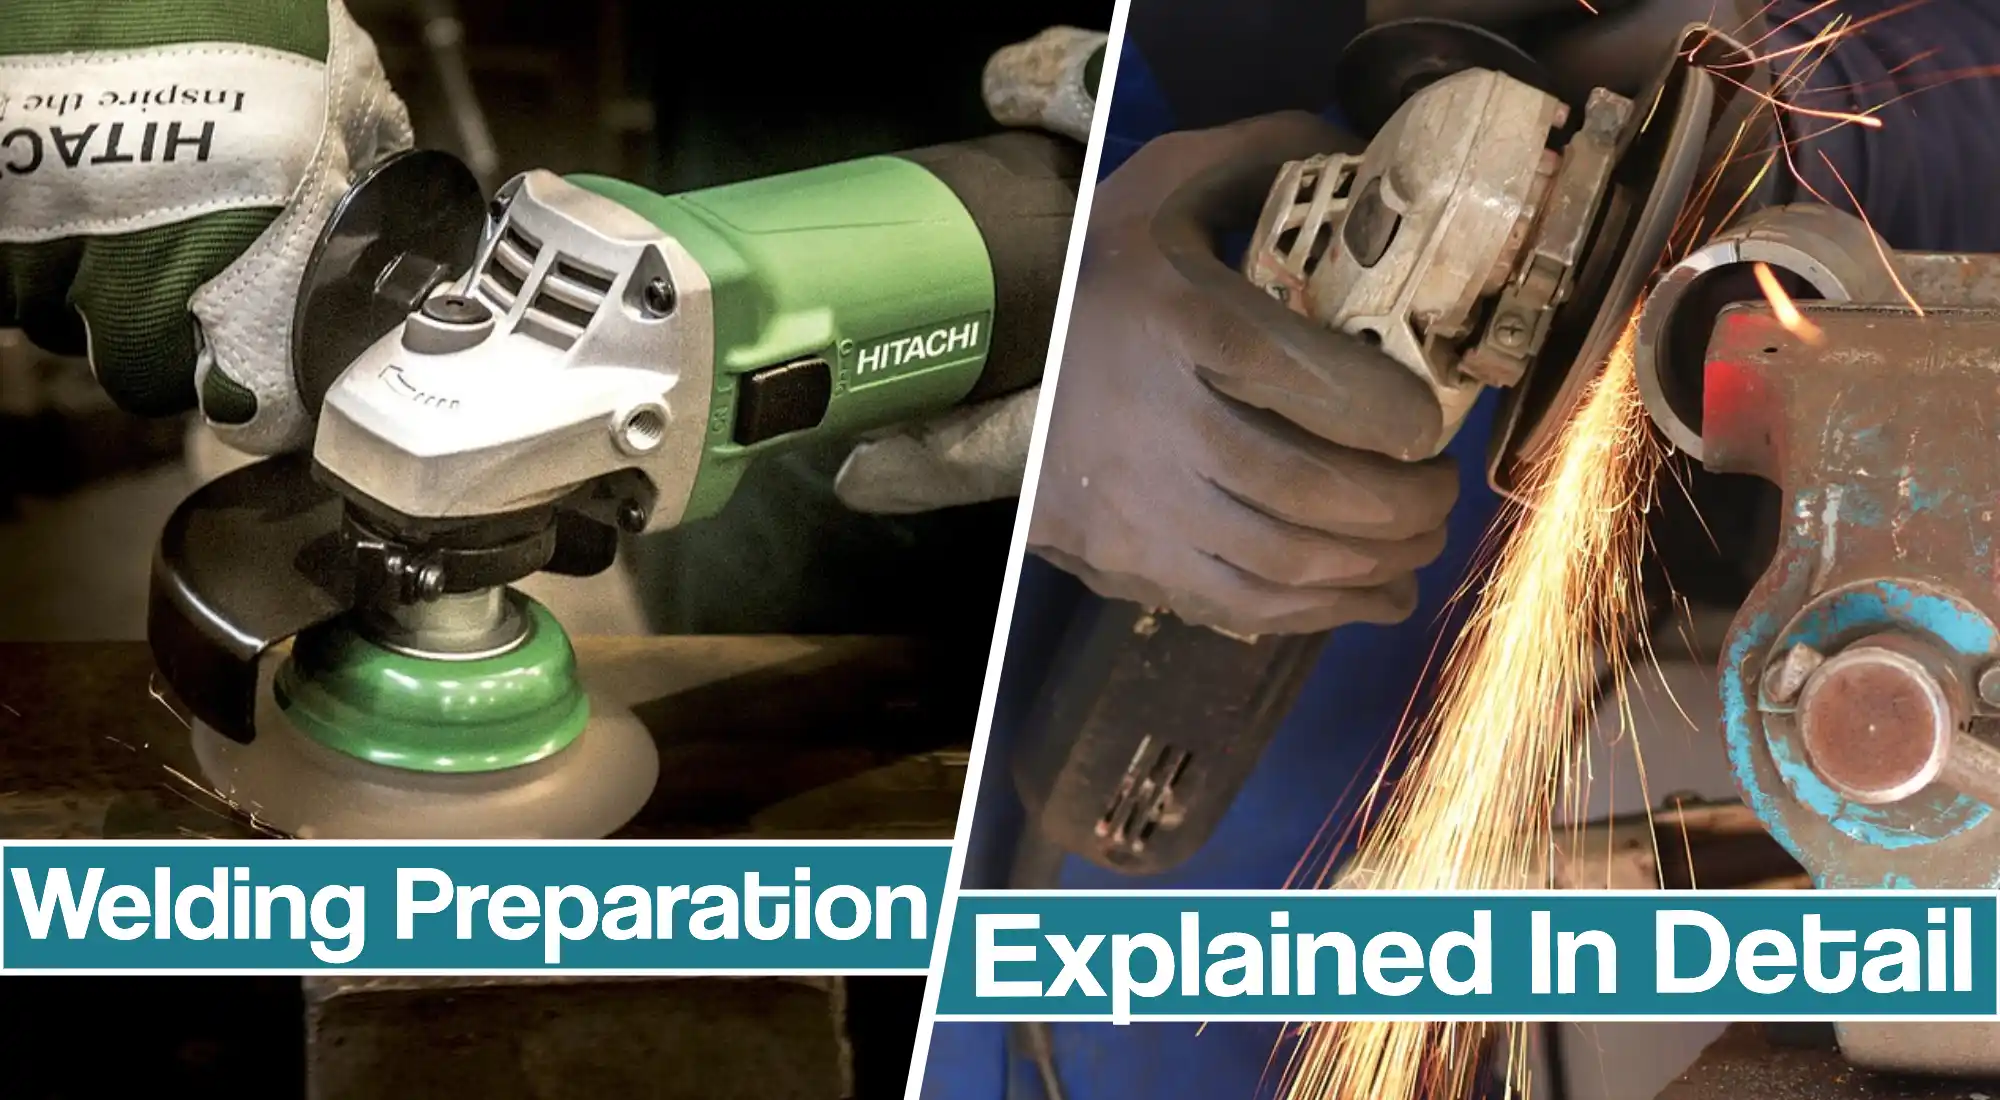 Featured image for the Welding Preparation article